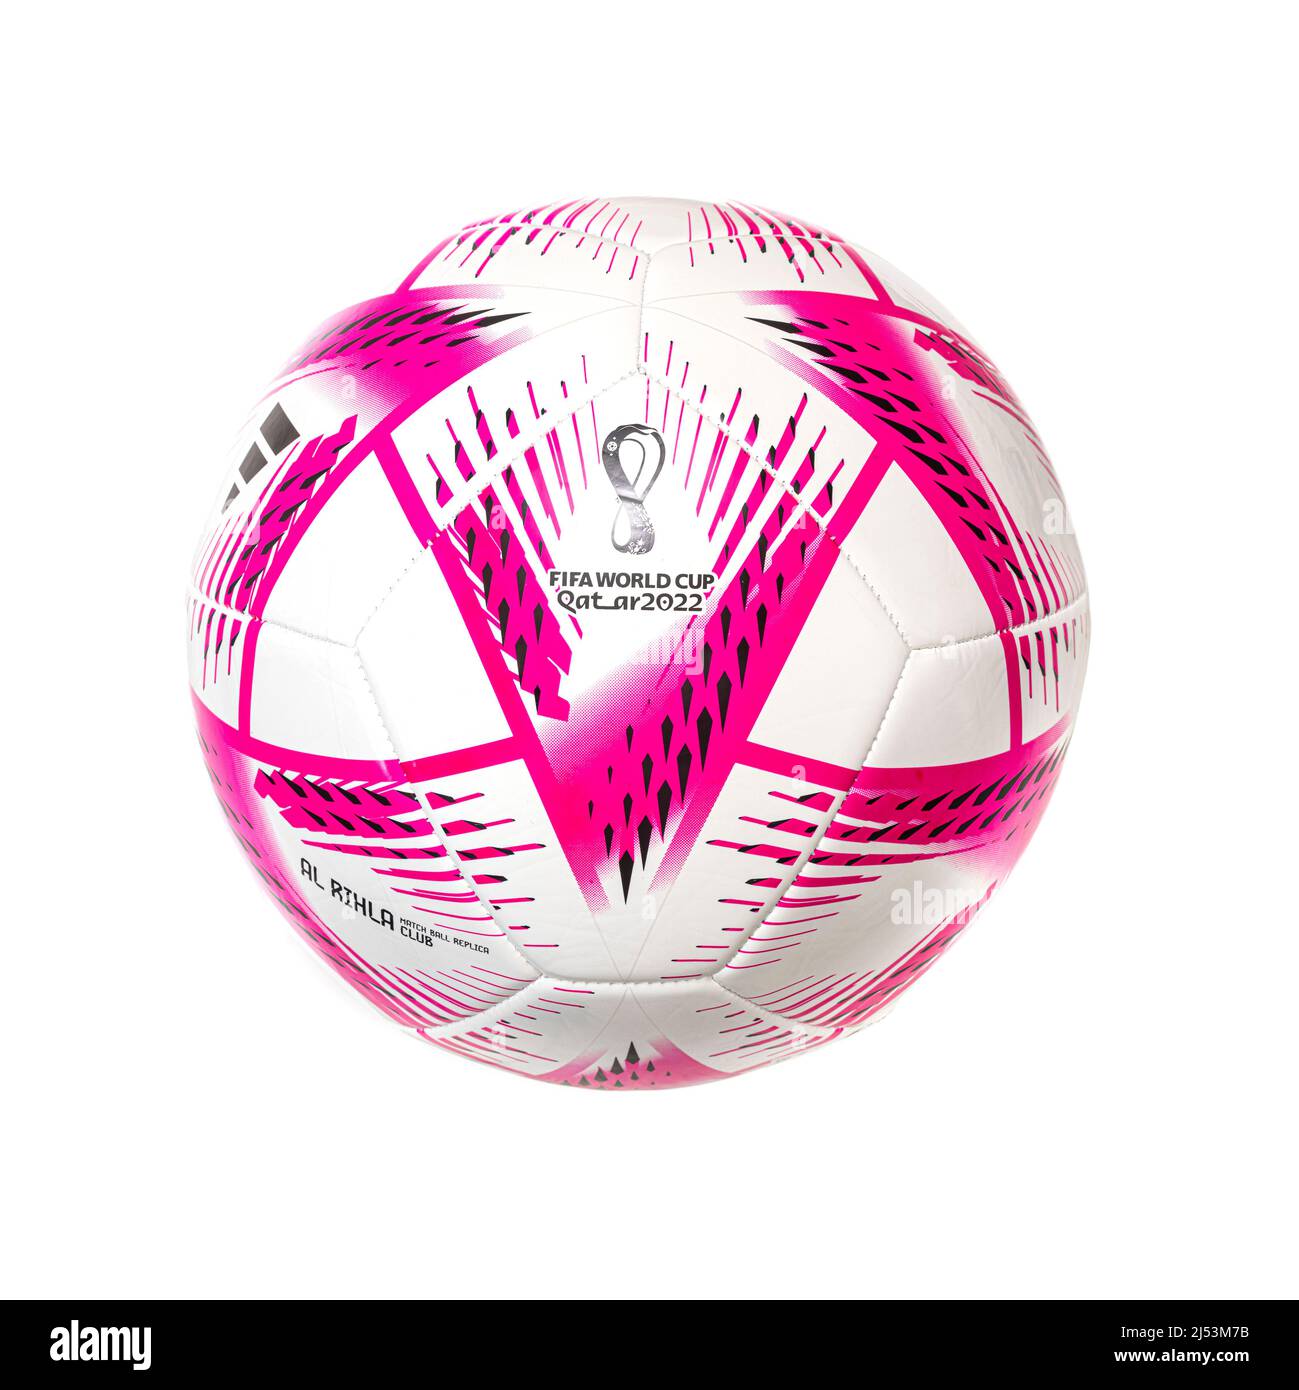 Qatar 2022 football world cup logo Cut Out Stock Images & Pictures - Alamy